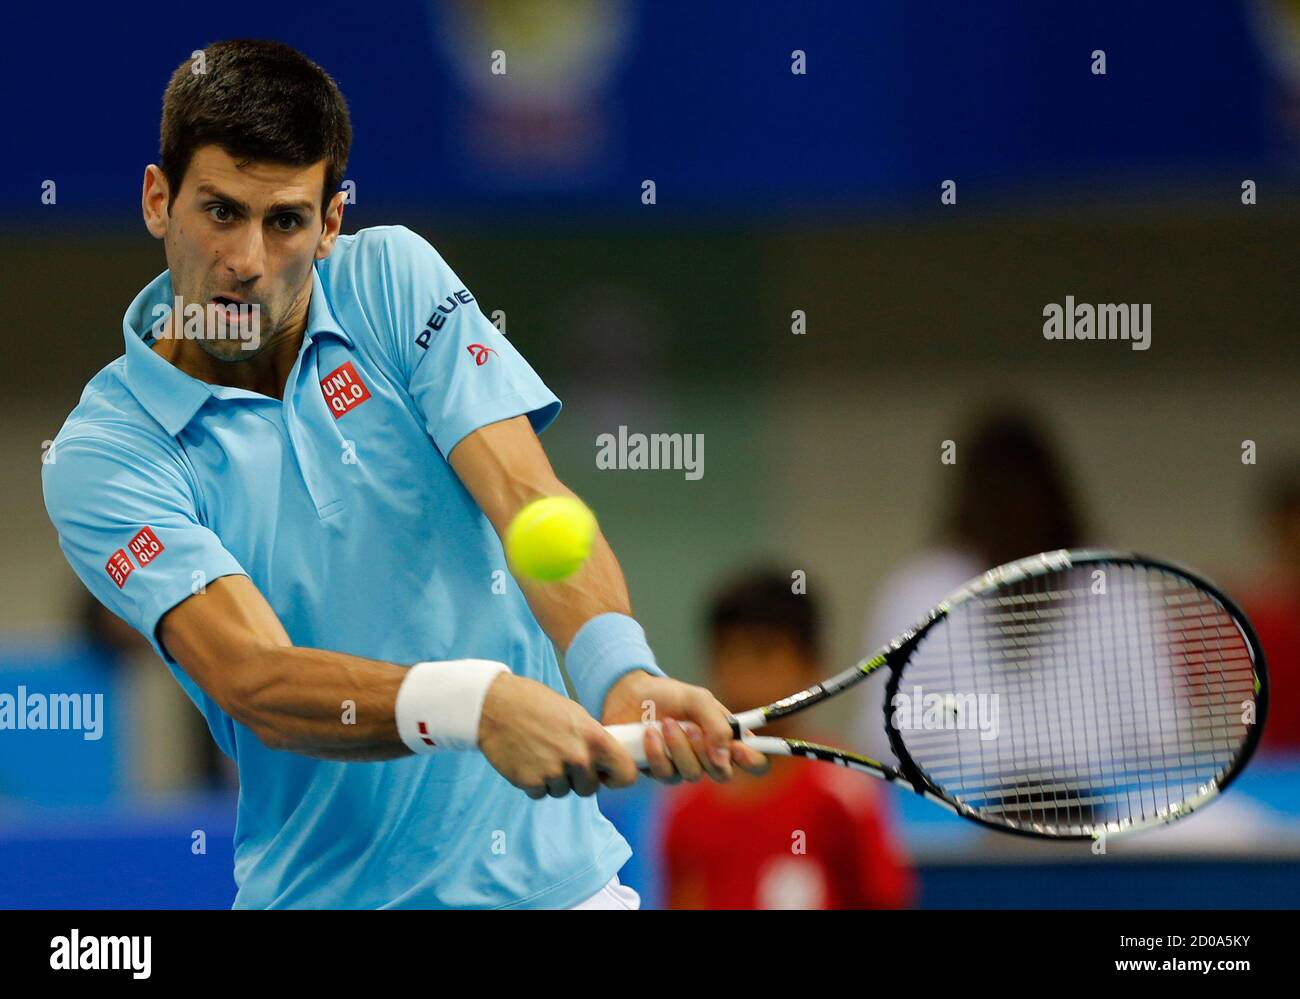 UAE Royals' Novak Djokovic of Serbia hits a return to Indian Aces' Gael  Monfis of France during their match at the International Premier Tennis  League (IPTL) in Dubai December 13, 2014. REUTERS/Ahmed